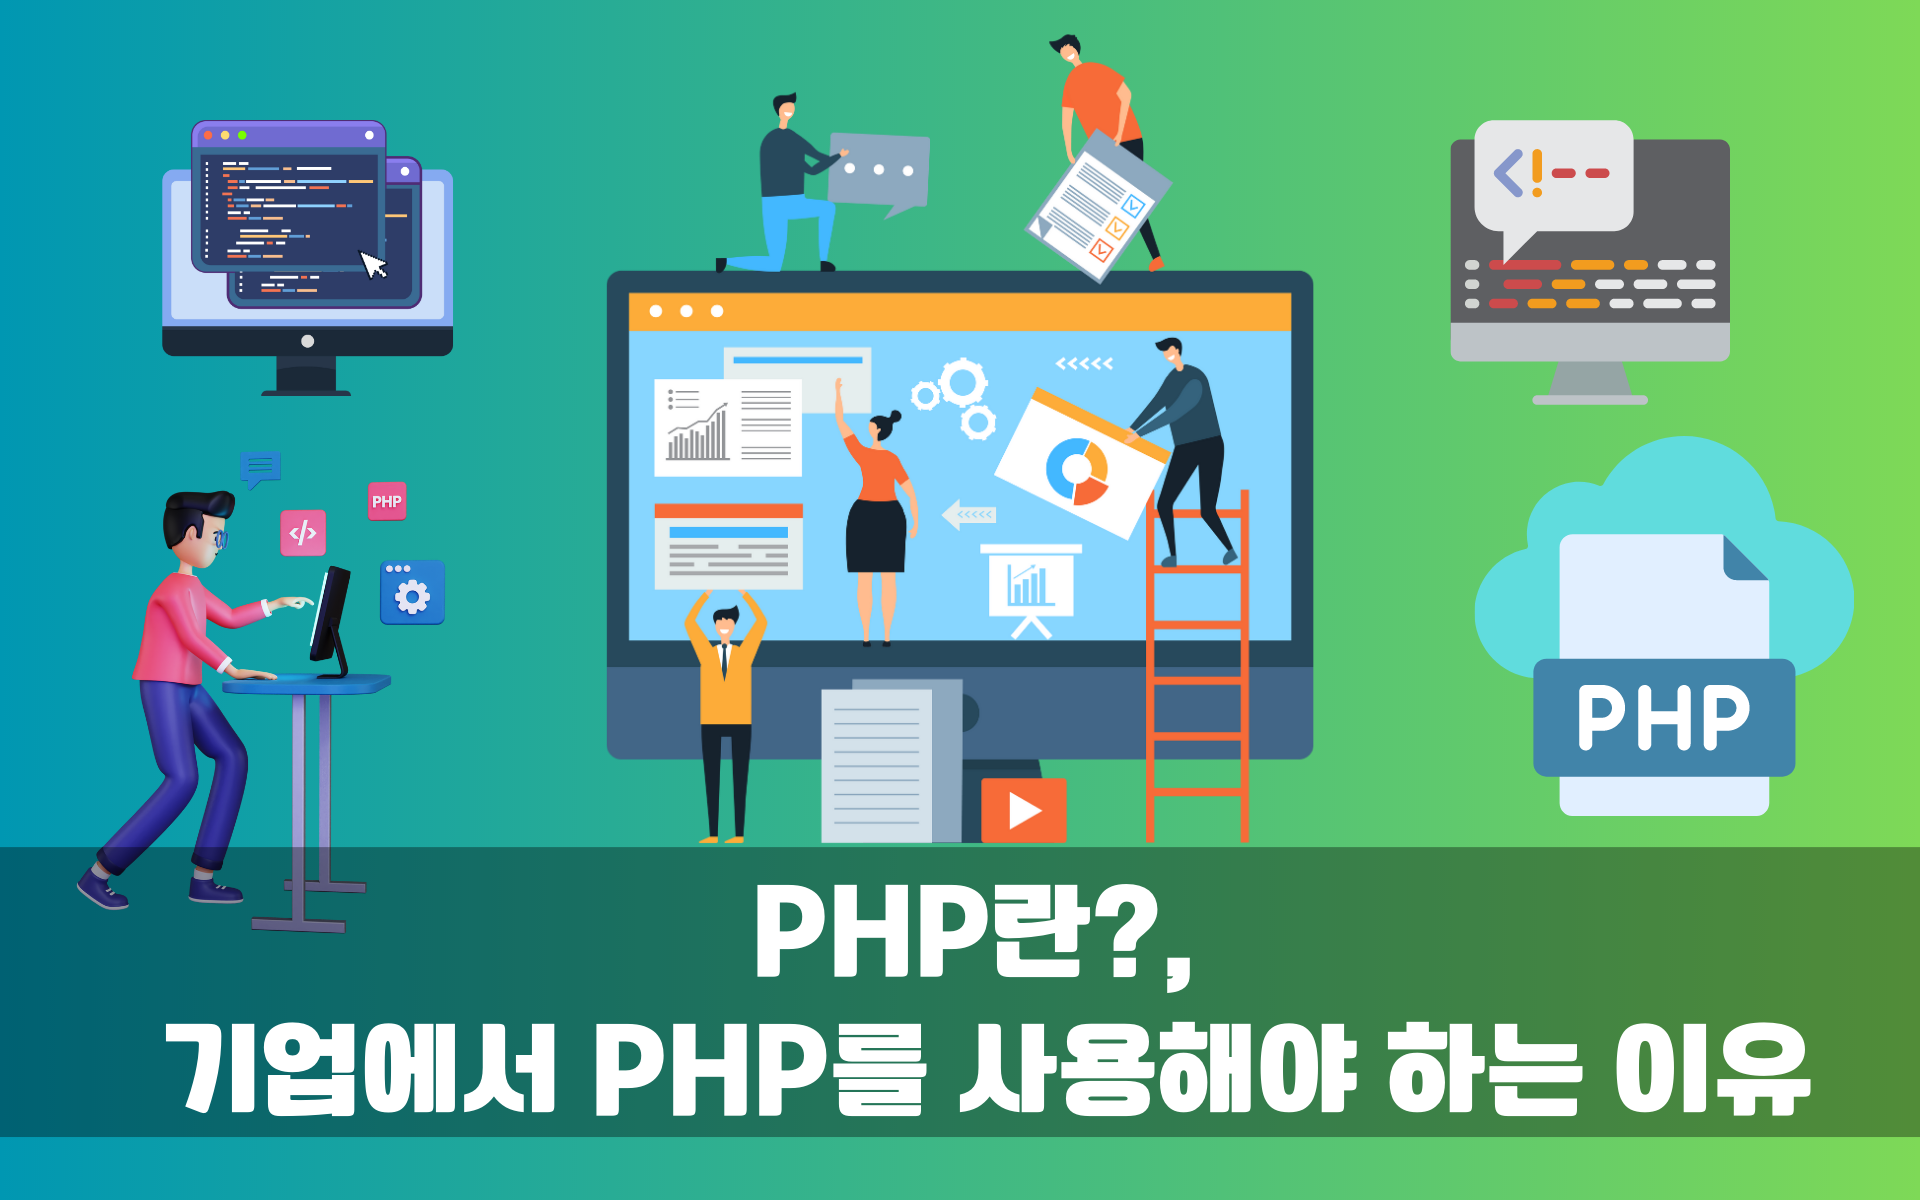  php 란?